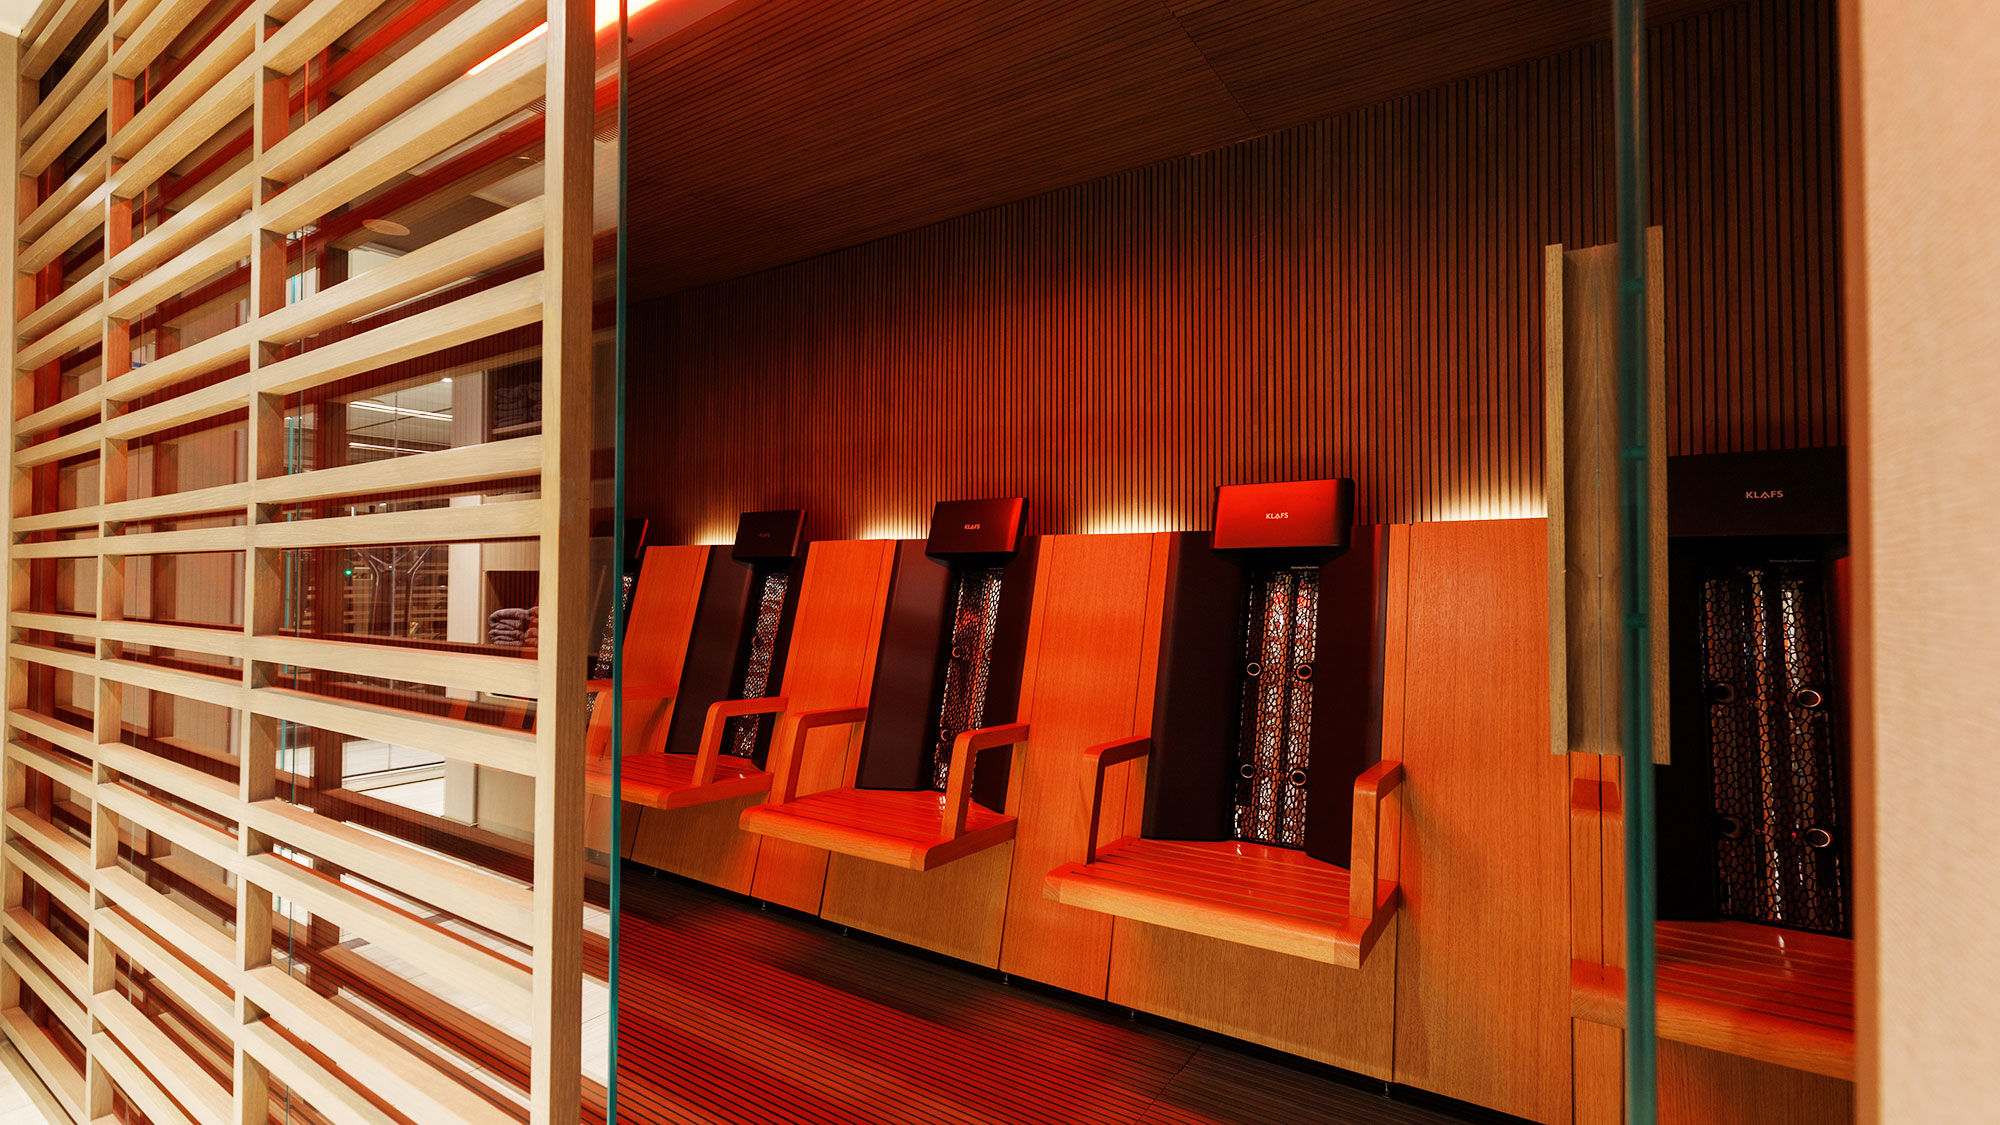 In the spa, seats produce infrared light beams that warm the back, an alternative to a traditional sauna.